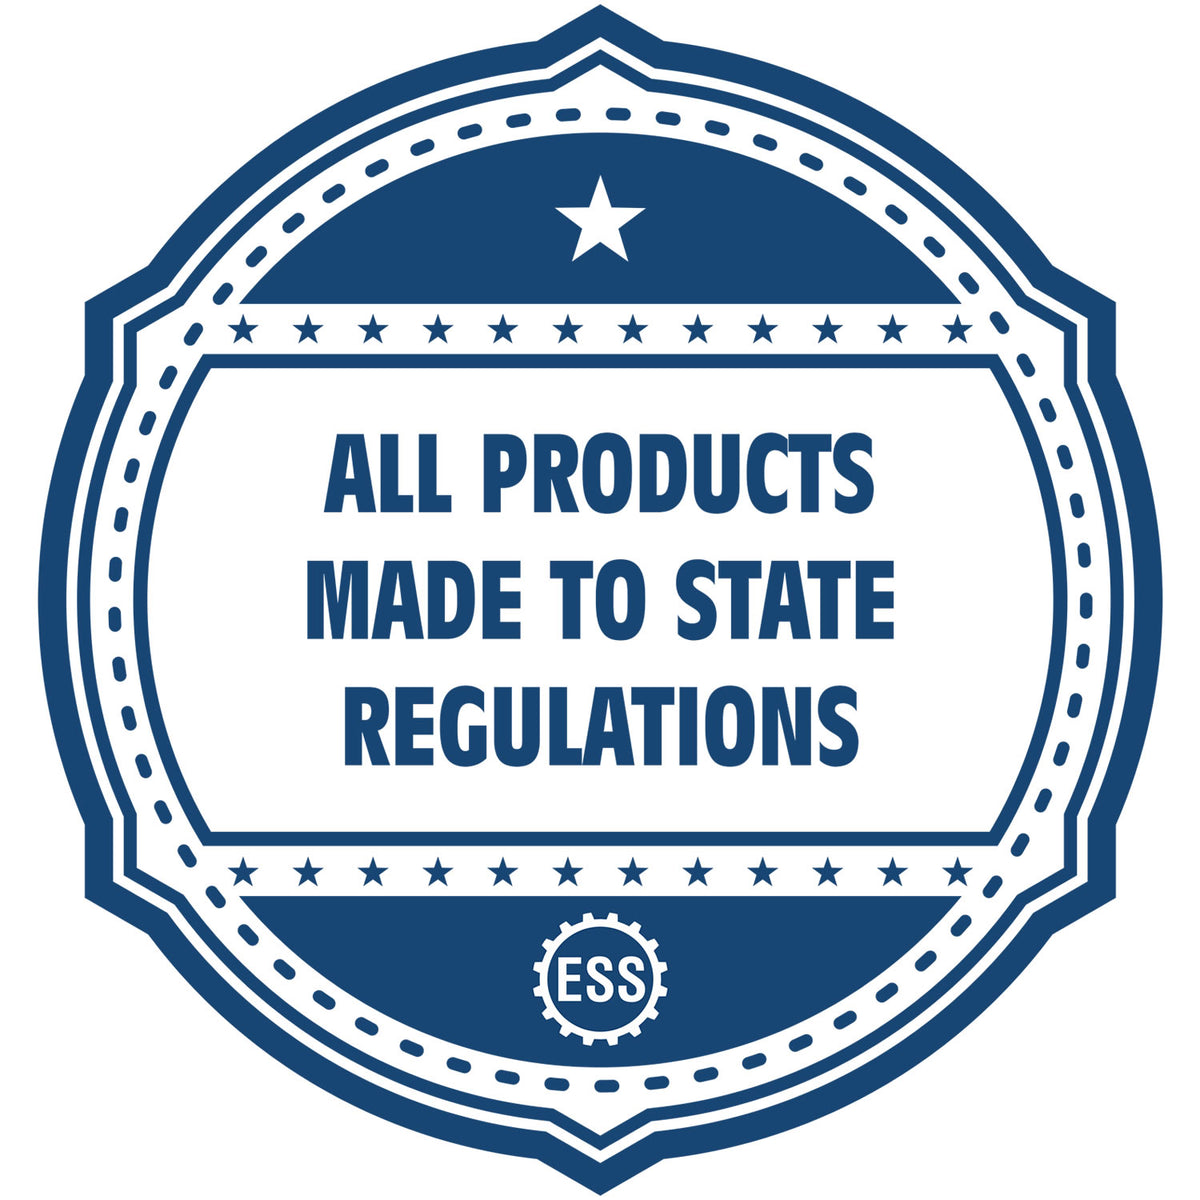 An icon or badge element for the Self-Inking Florida PE Stamp showing that this product is made in compliance with state regulations.